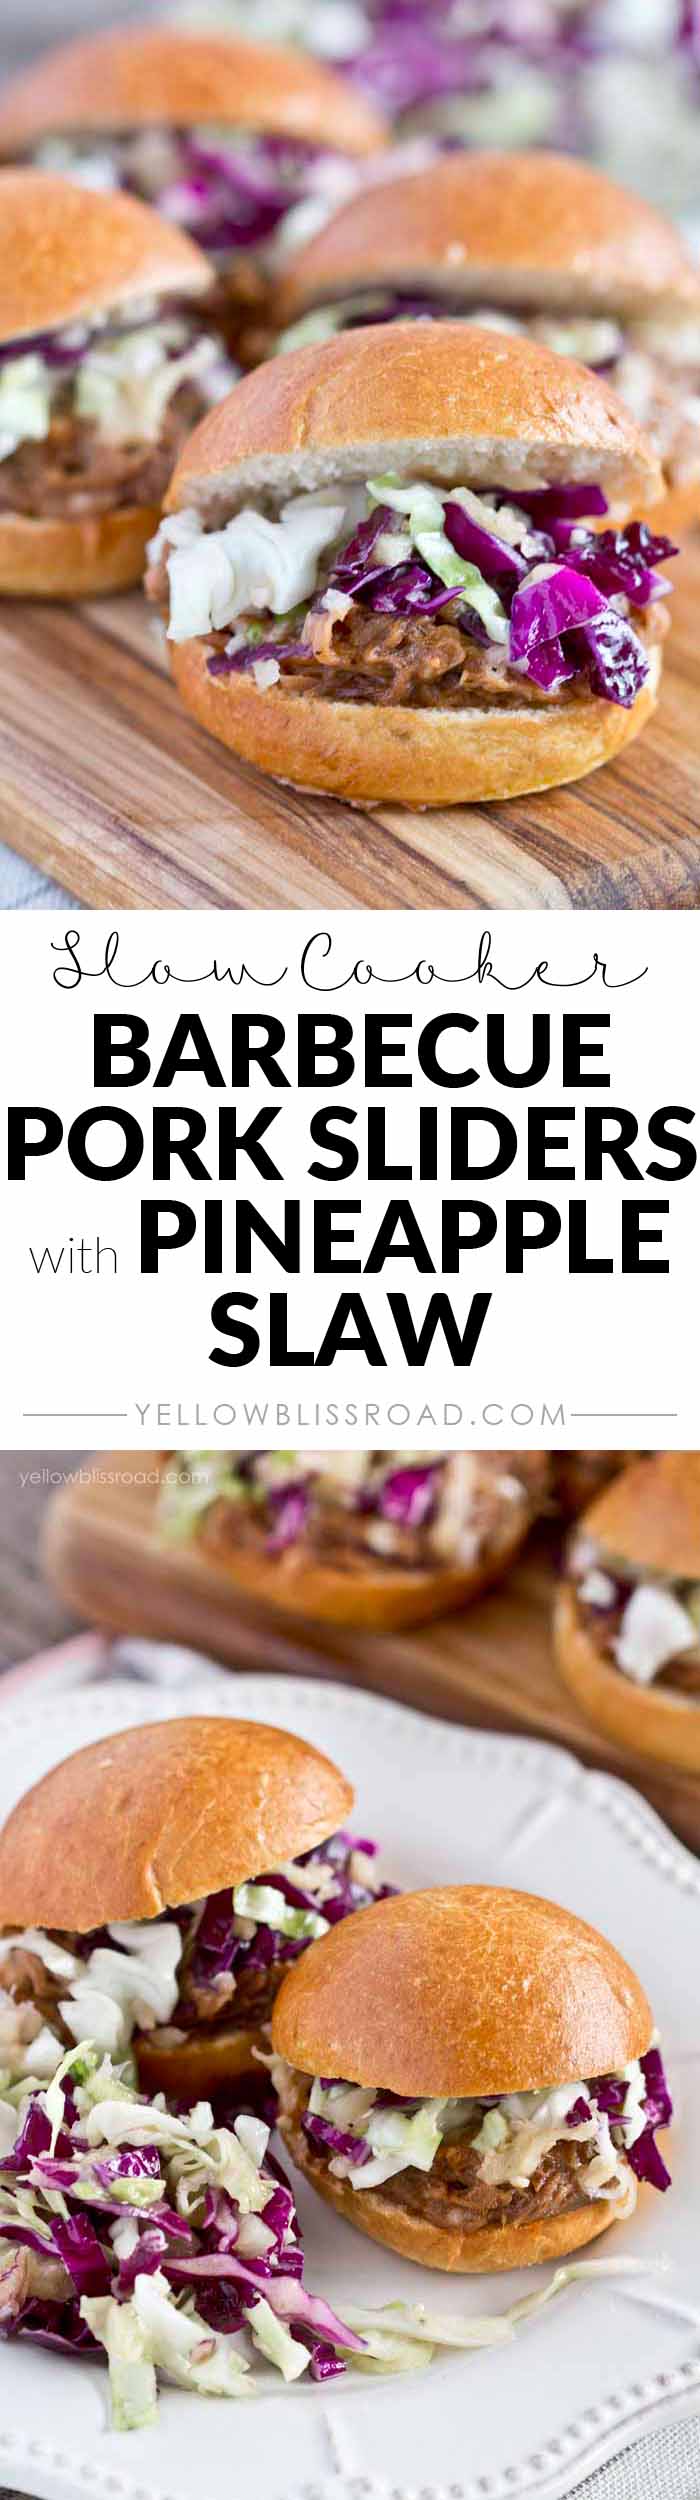 Slow Cooker Barbecue Pork Sliders with Pineapple Slaw